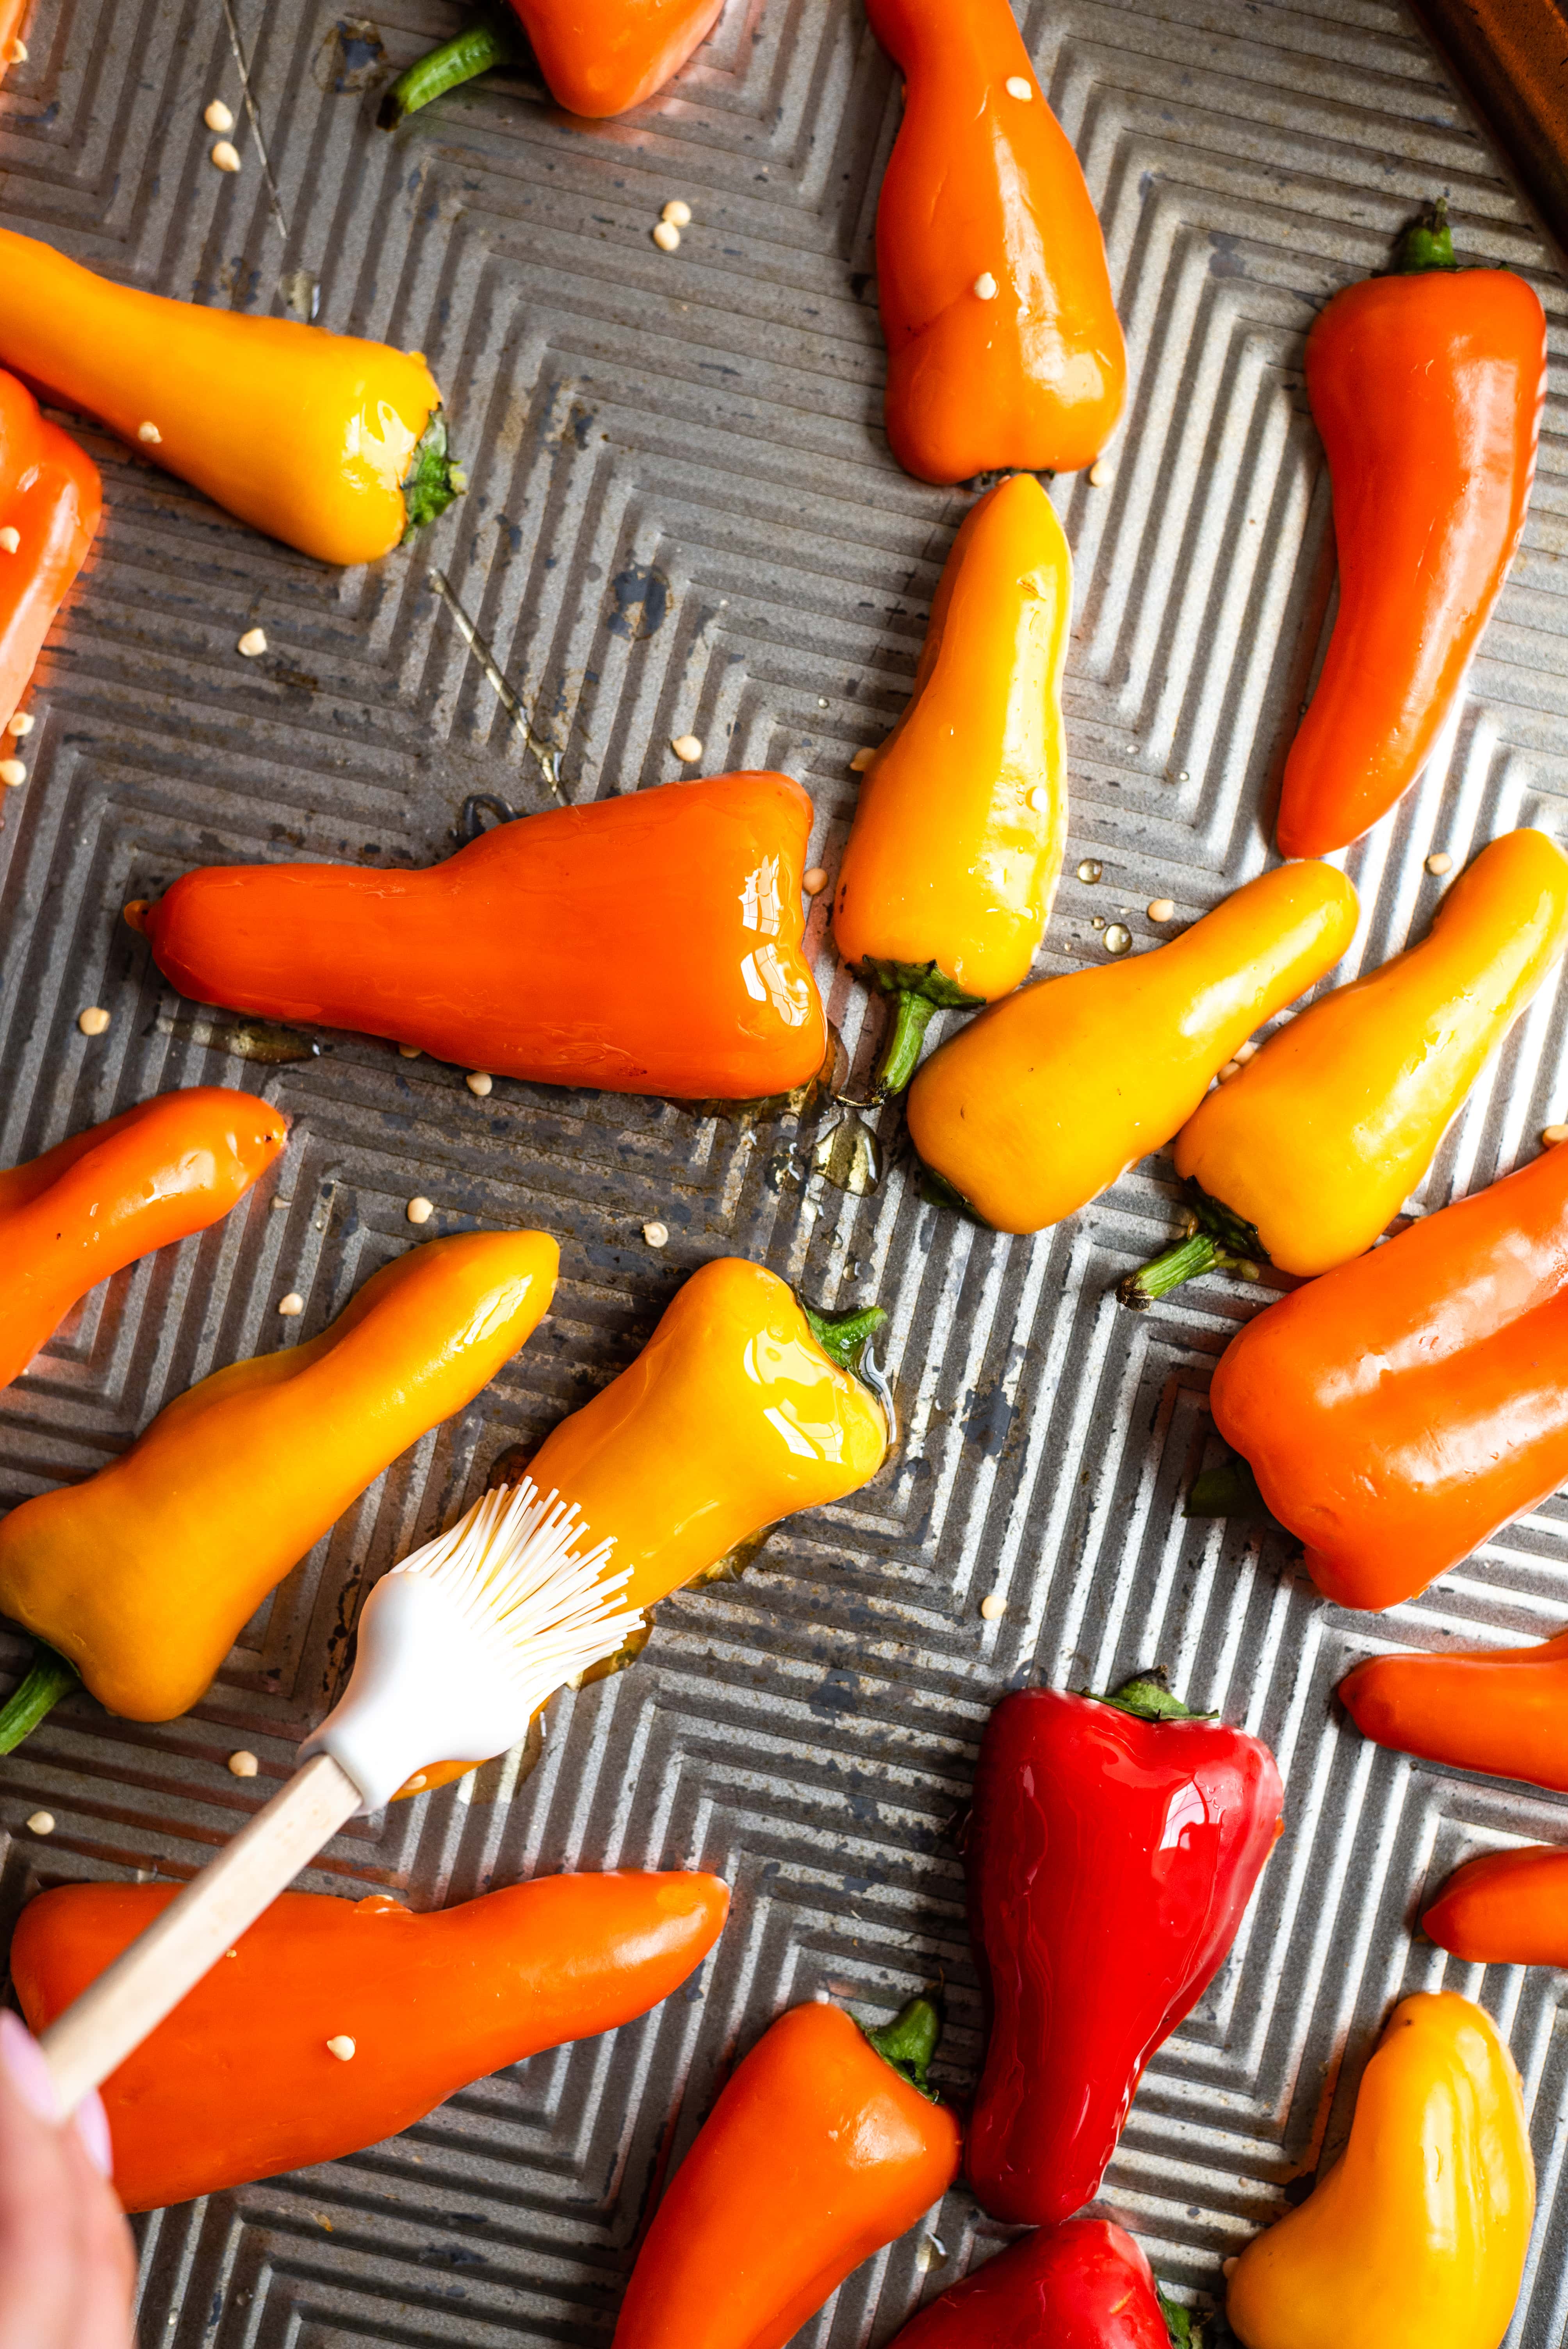 The sliced peppers being brushed with olive oil on a baking sheet,